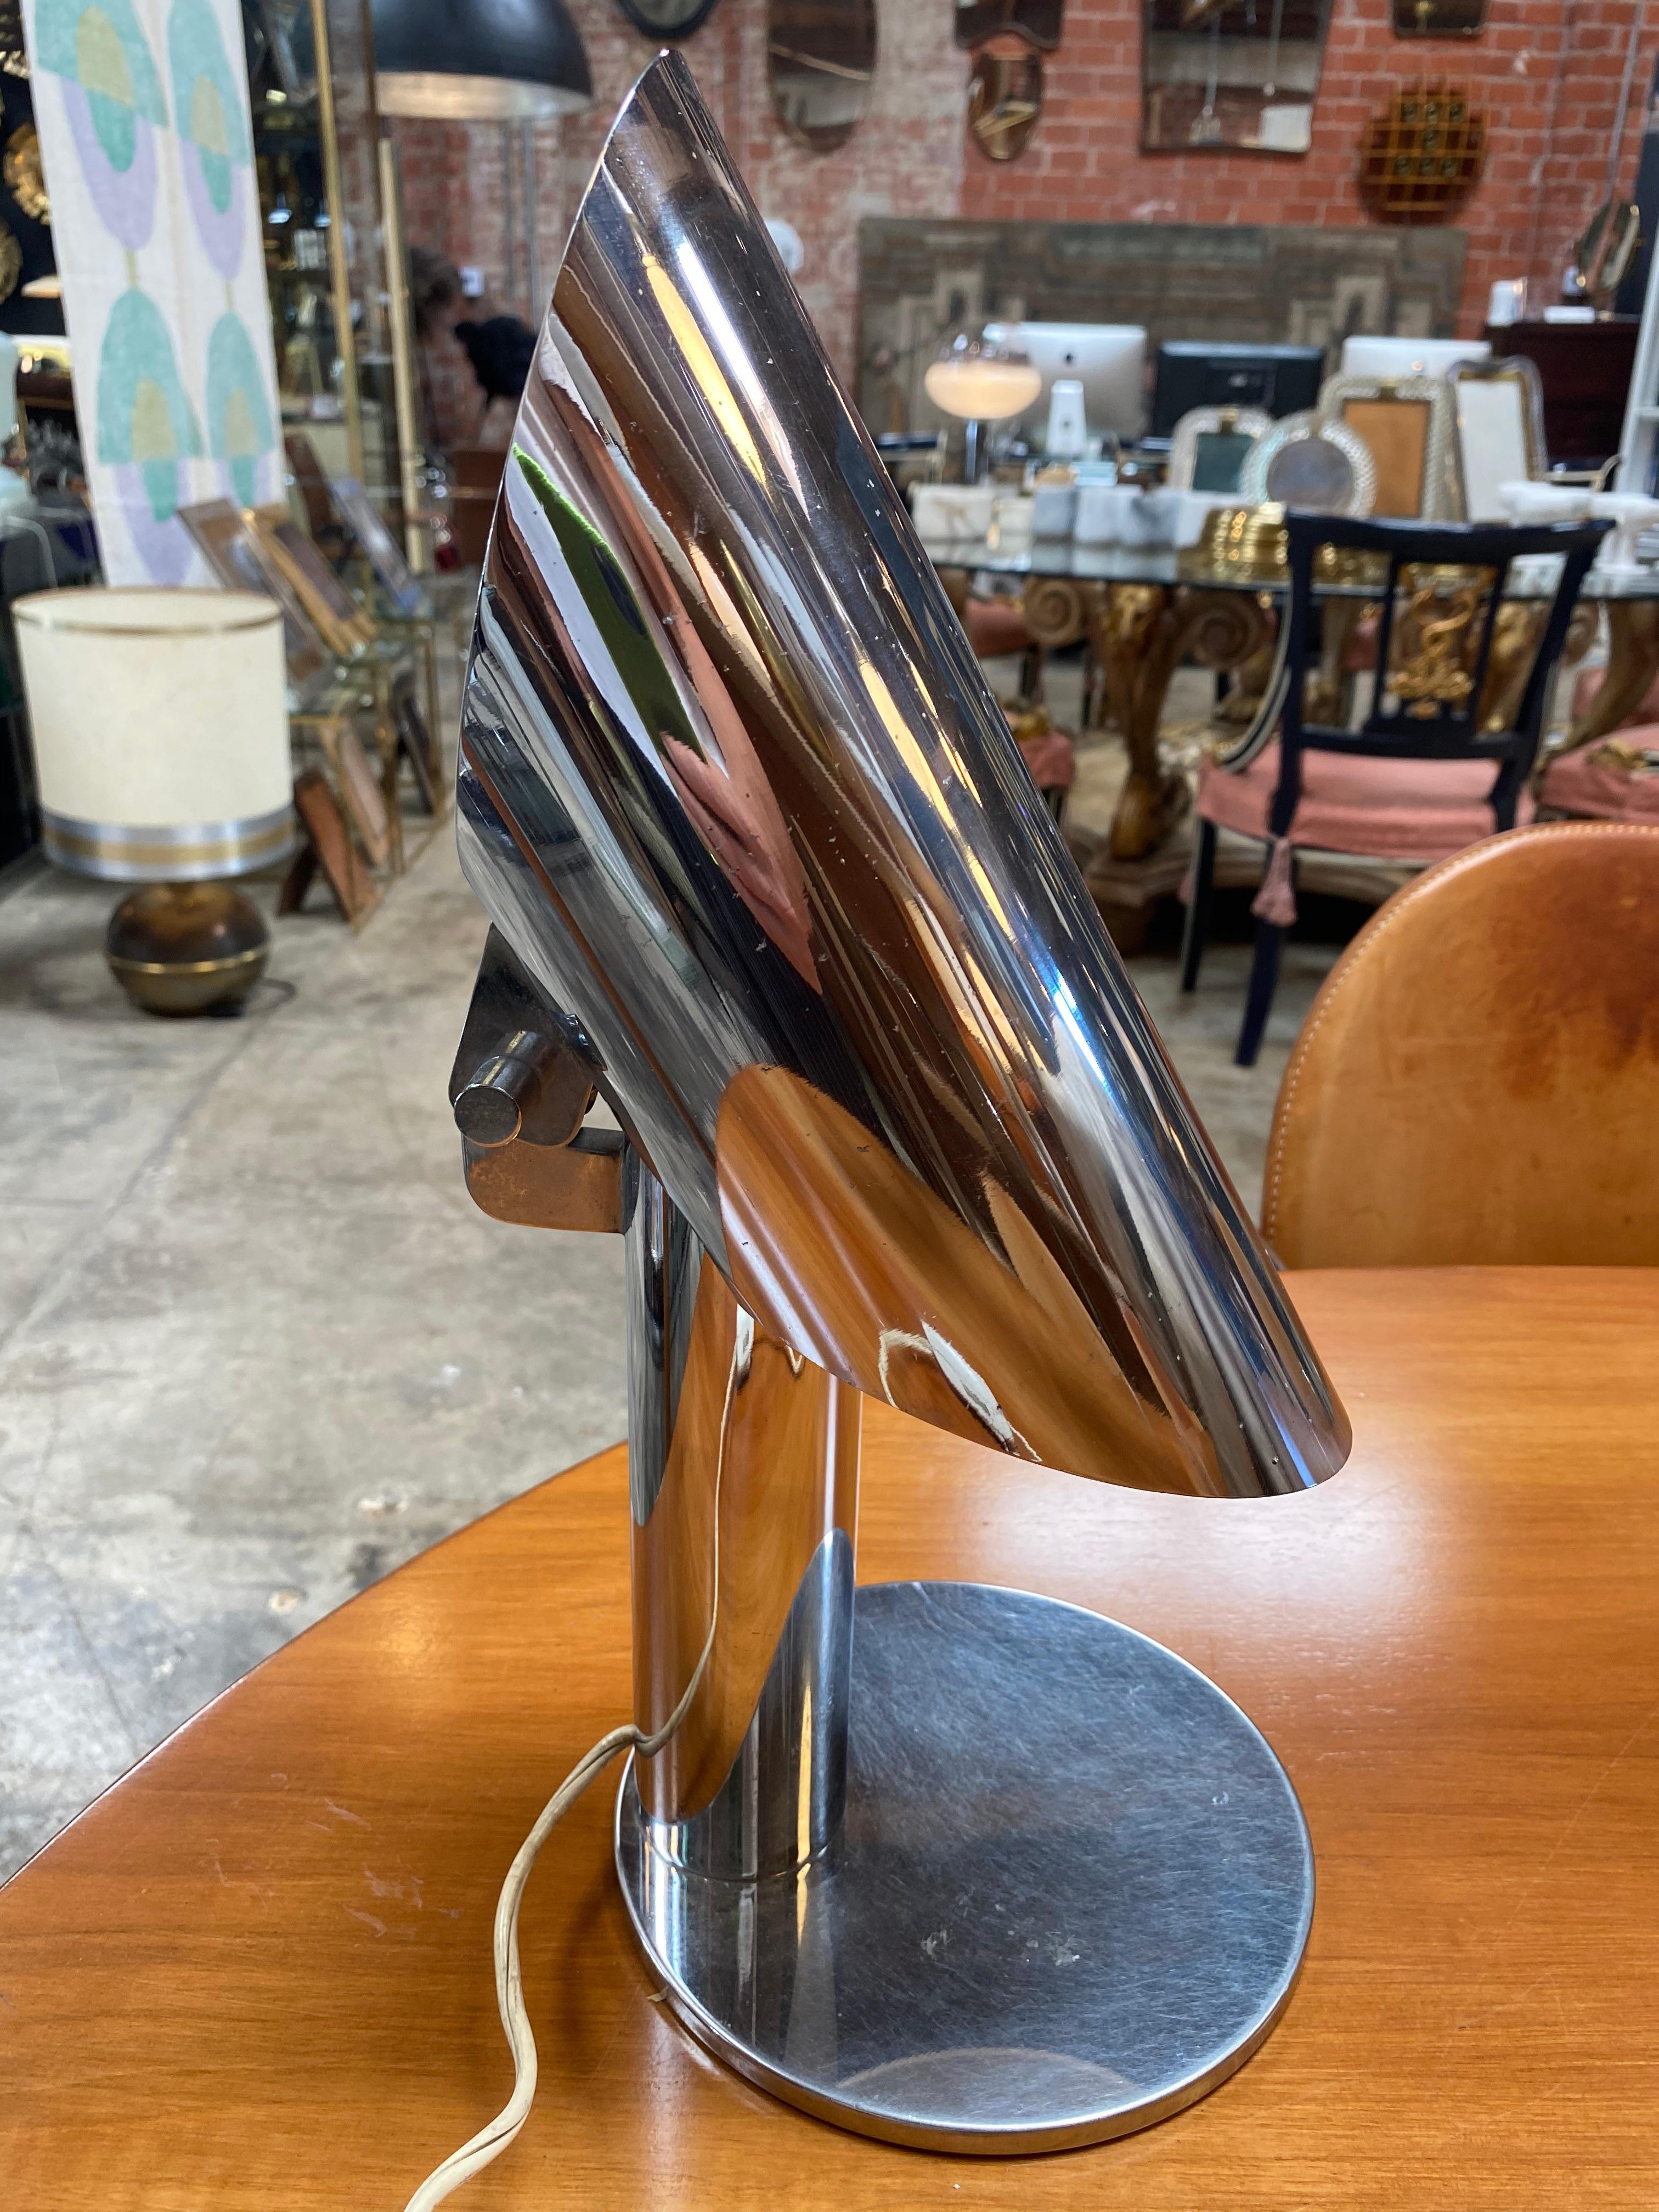 Italian pivoting table lamp by Arredoluce, Italy, 1970s.

The table lamp is all in chrome with an innovative design and with the characteristic of being pivoting giving a modern touch.
The lamp is in excellent condition and ready to give a